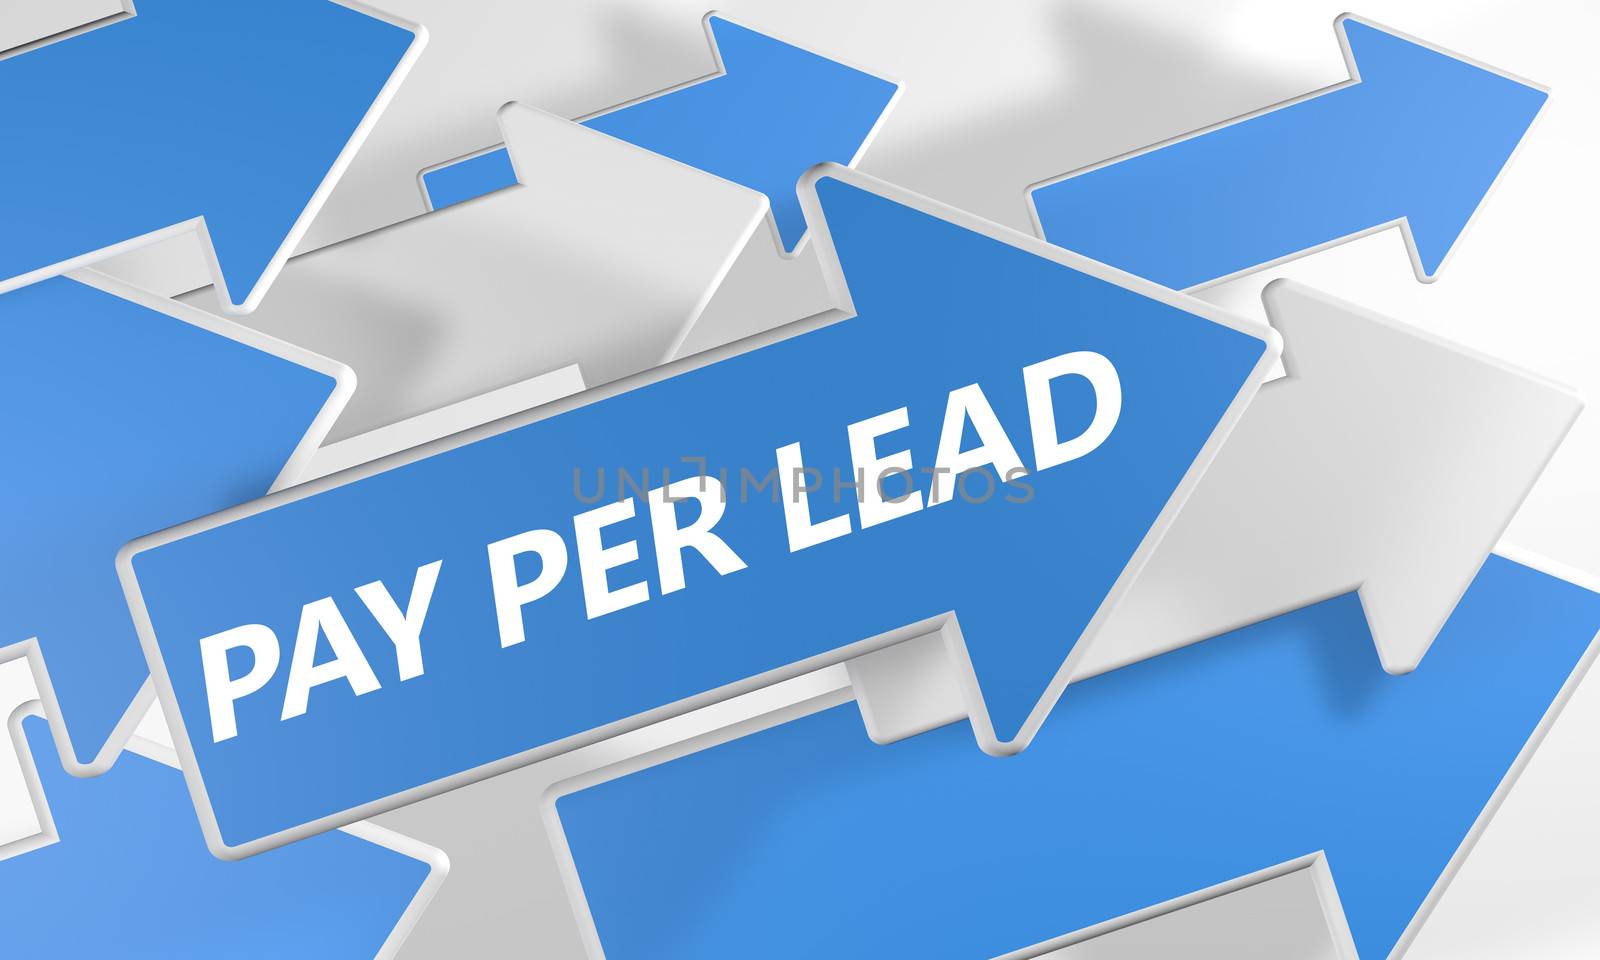 Pay per Lead 3d render concept with blue and white arrows flying upwards over a white background.